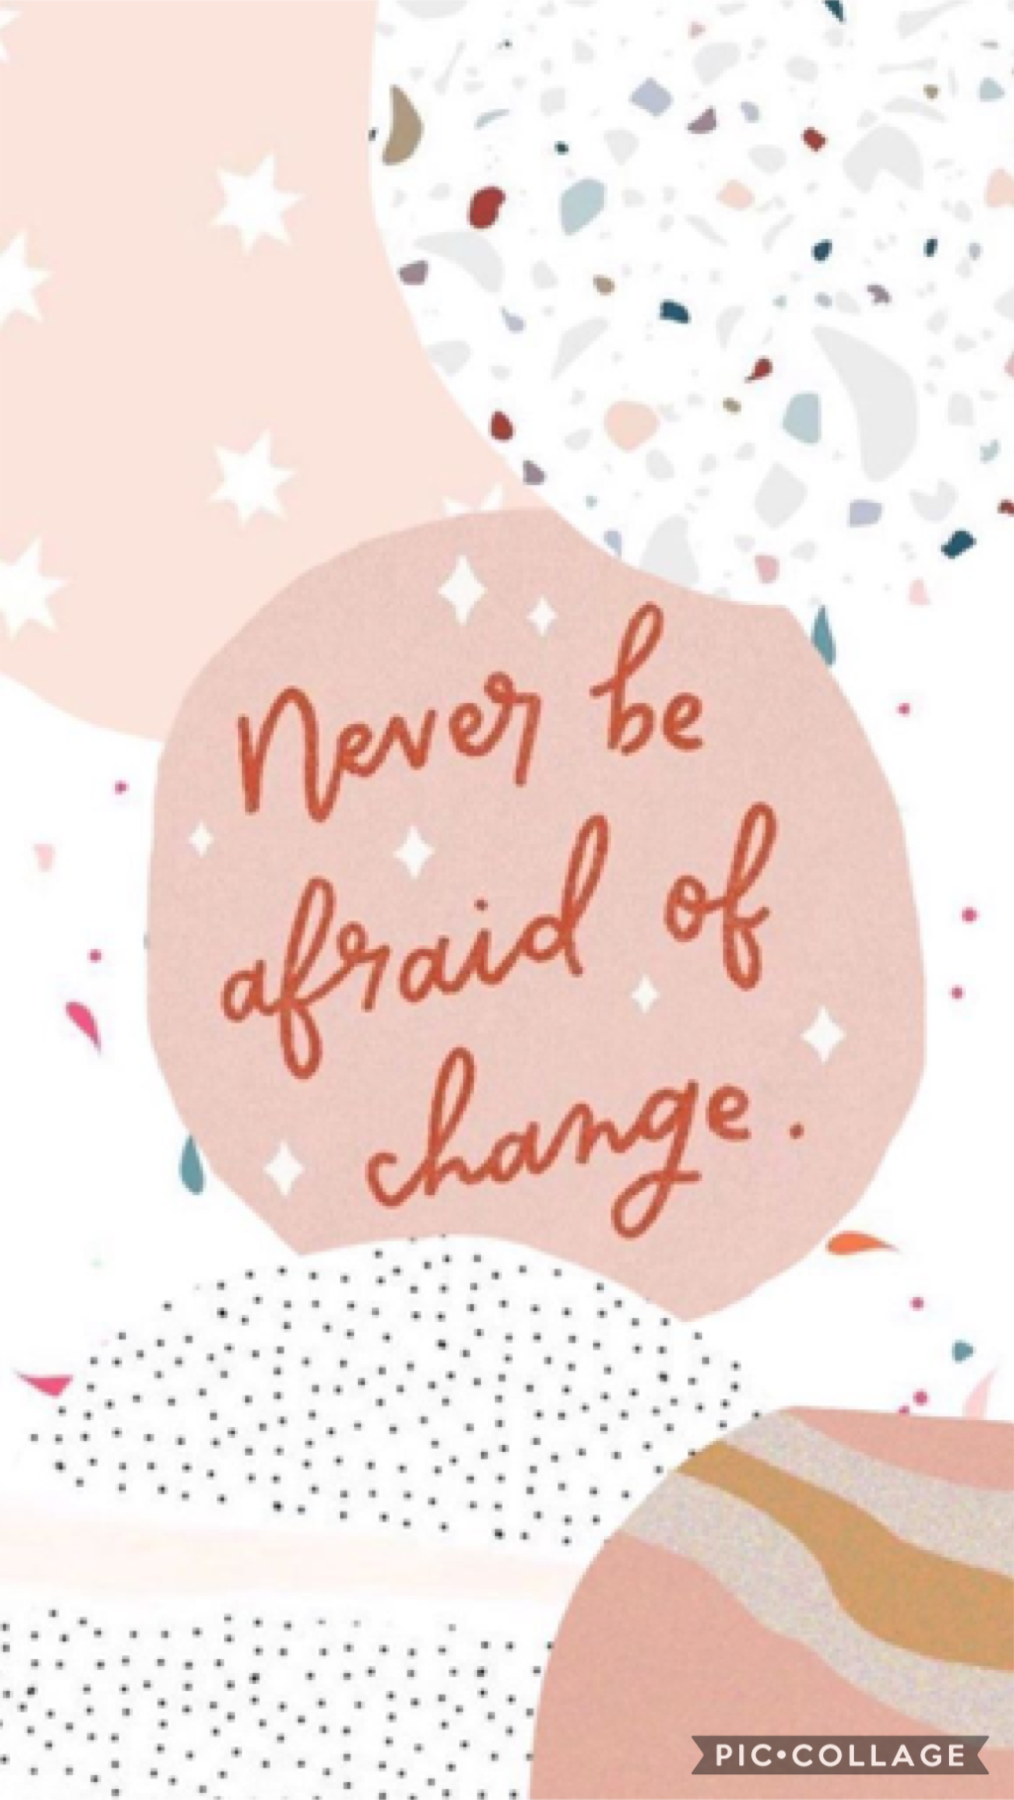 Change is something not to be afraid of 